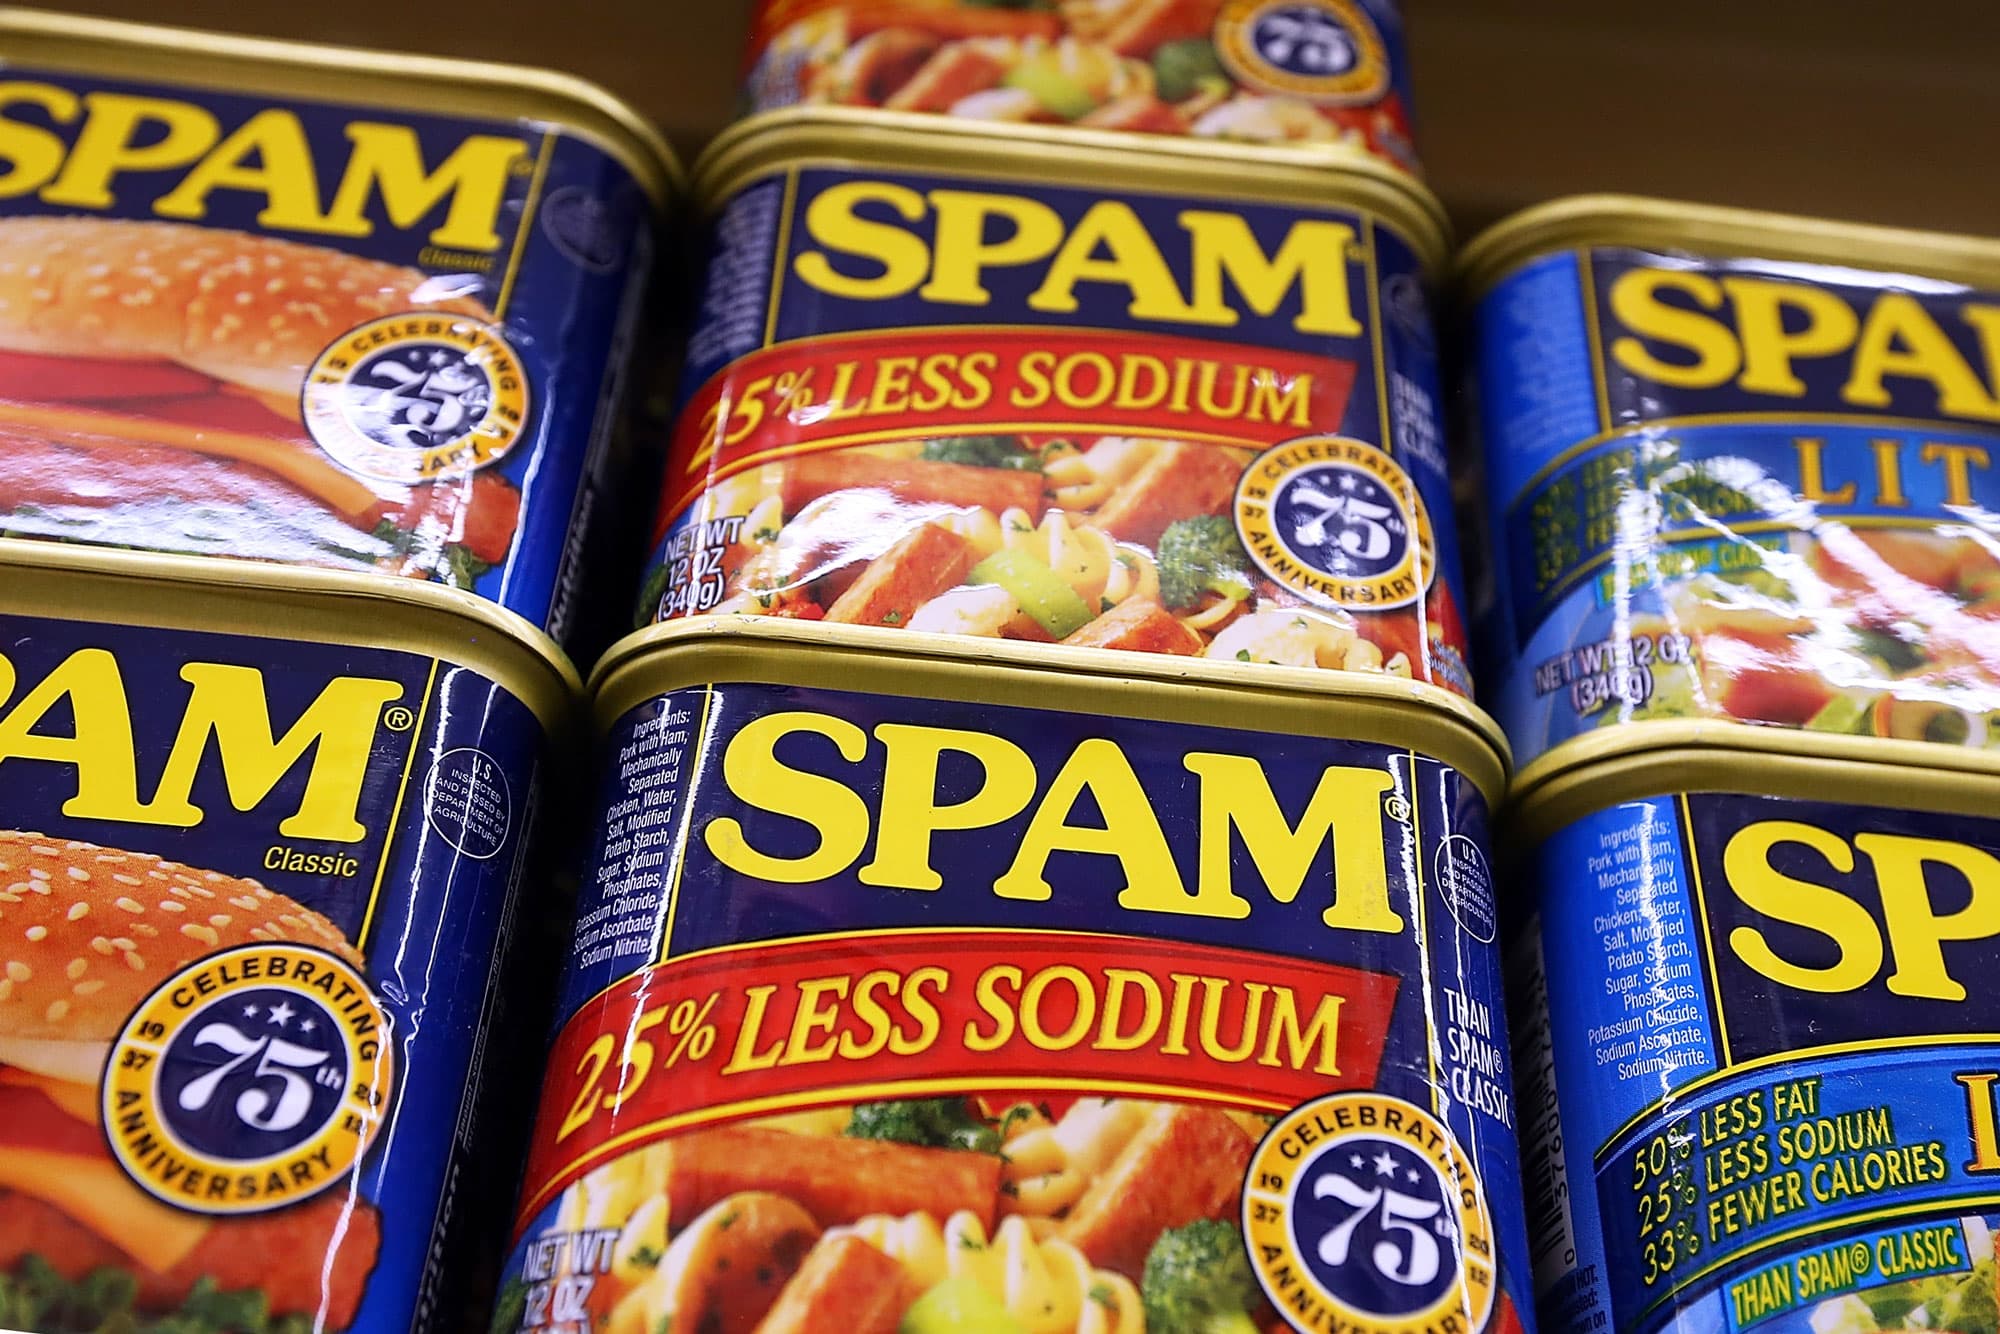 Spam sales hit record high for seventh straight year in 2021, says Hormel Foods CEO